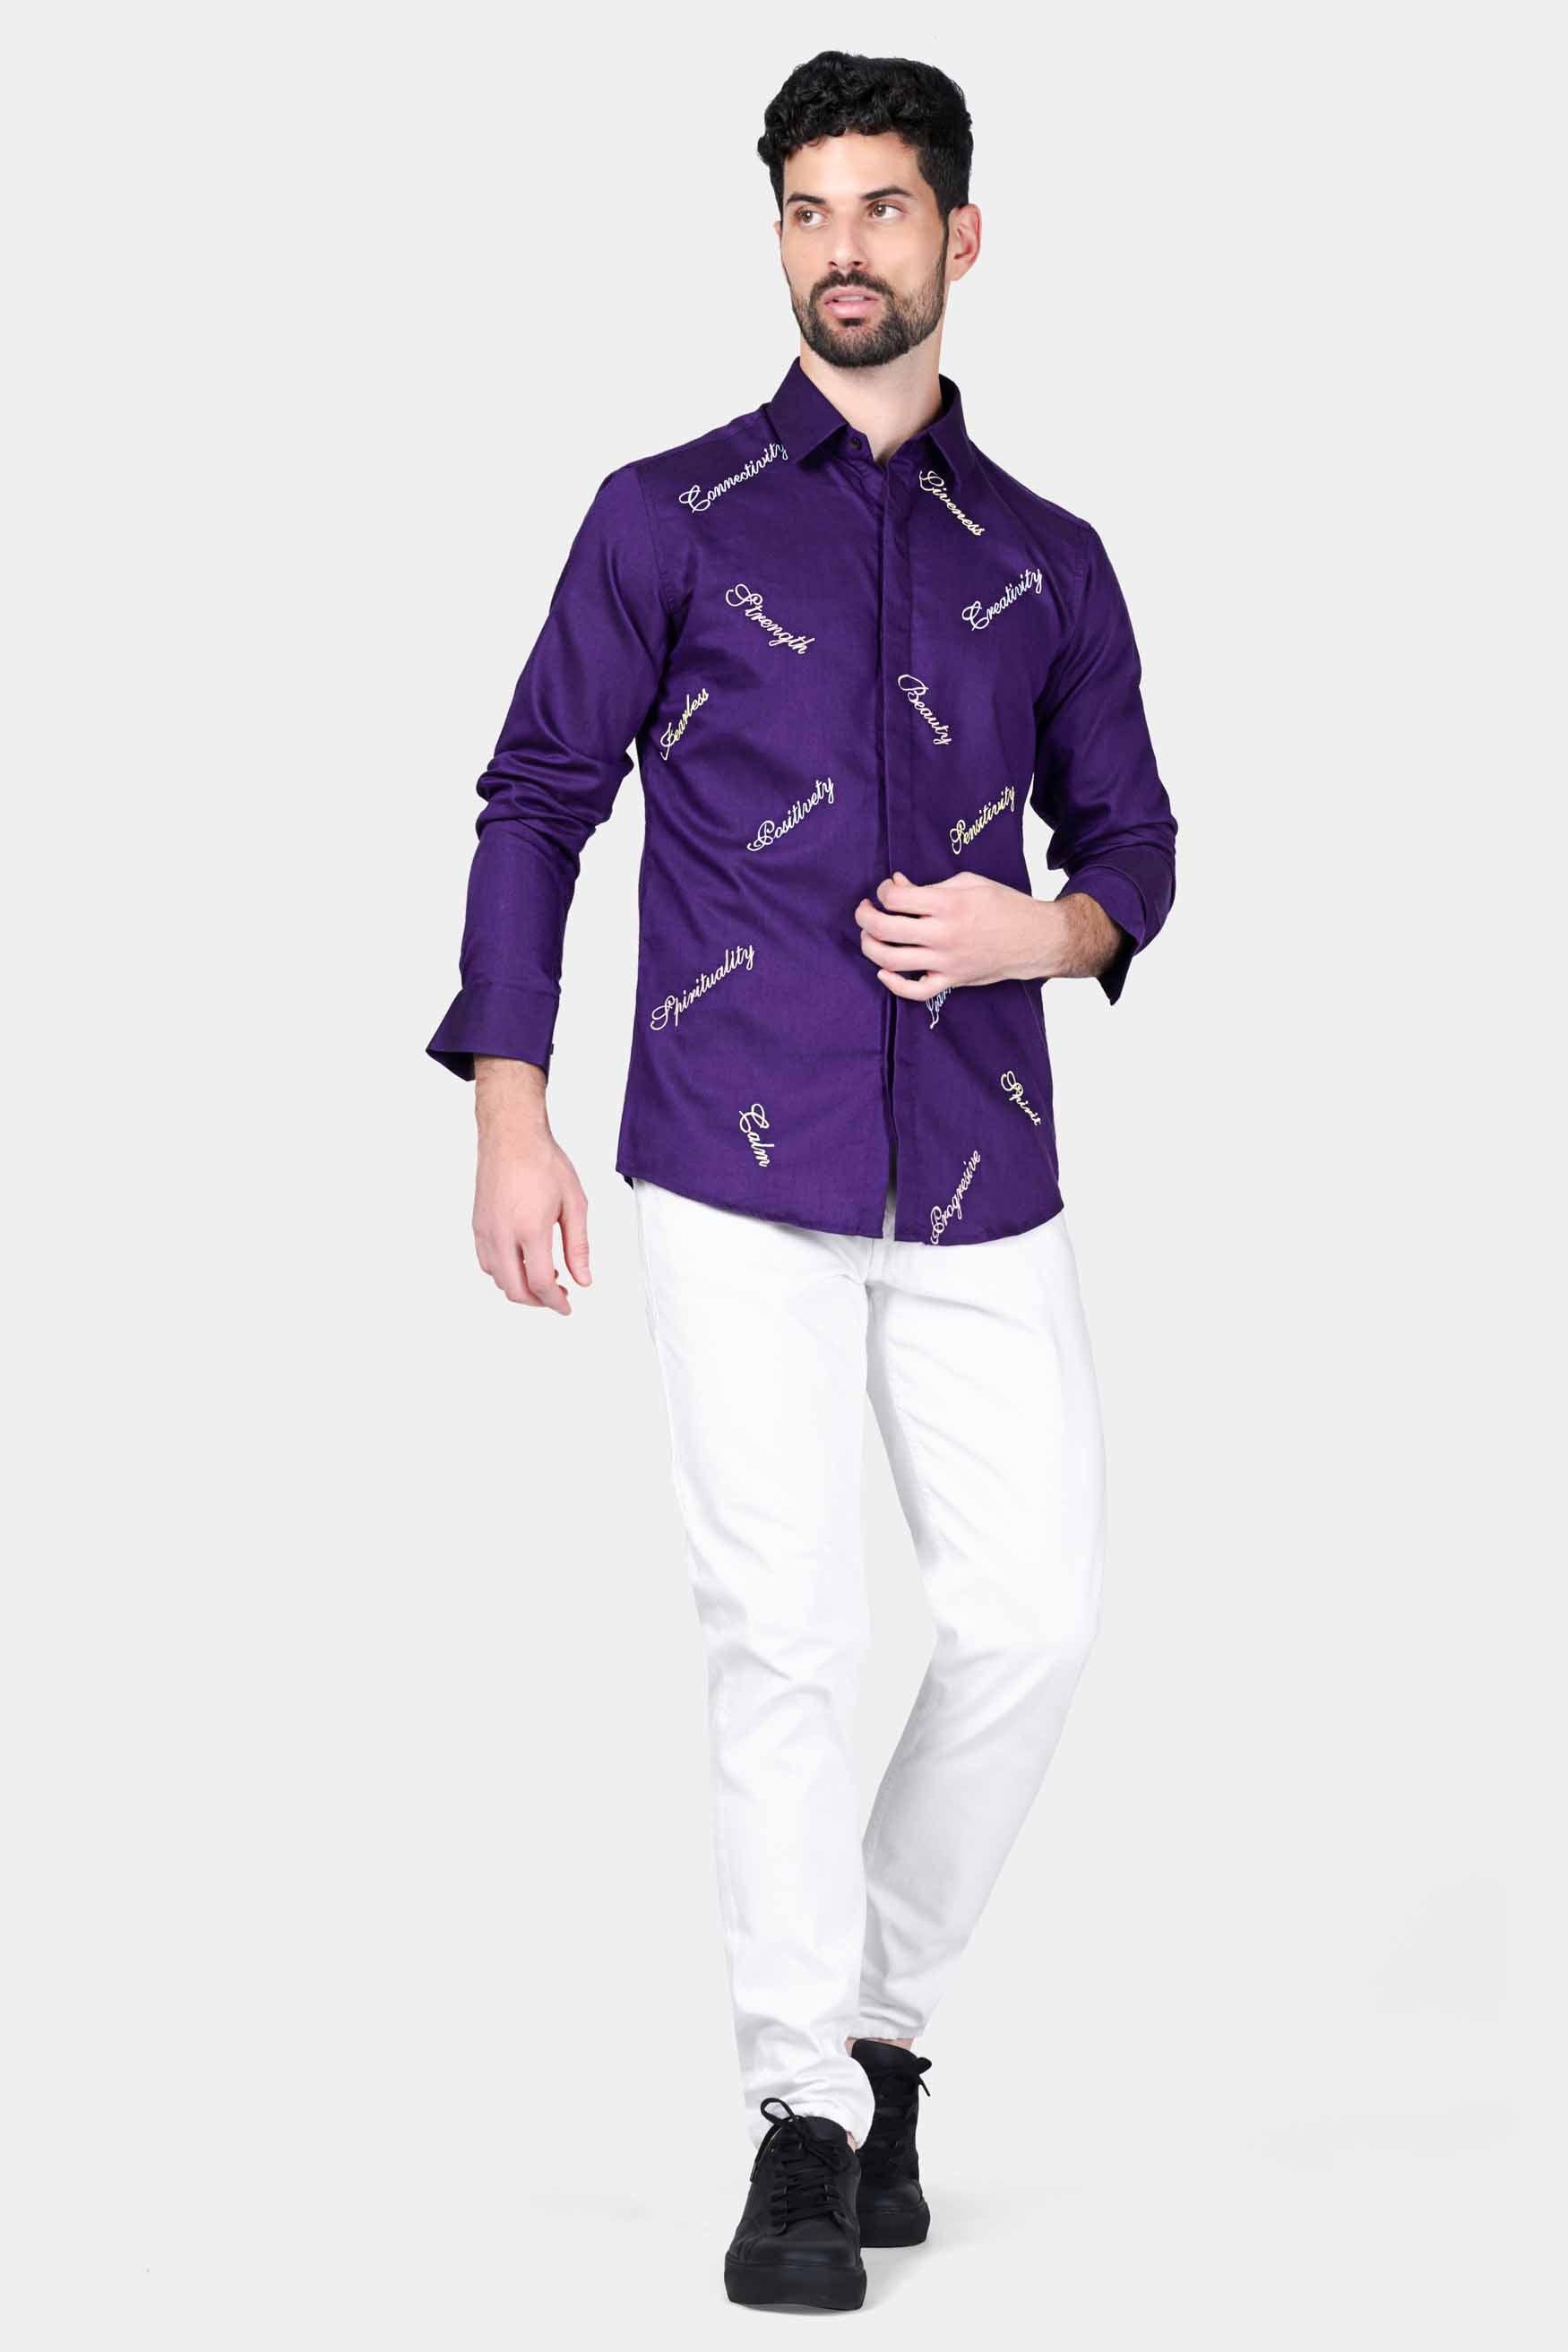 Eminence Purple Embroidered Royal Oxford Designer Shirt 11558-BLK-P782-38, 11558-BLK-P782-H-38, 11558-BLK-P782-39, 11558-BLK-P782-H-39, 11558-BLK-P782-40, 11558-BLK-P782-H-40, 11558-BLK-P782-42, 11558-BLK-P782-H-42, 11558-BLK-P782-44, 11558-BLK-P782-H-44, 11558-BLK-P782-46, 11558-BLK-P782-H-46, 11558-BLK-P782-48, 11558-BLK-P782-H-48, 11558-BLK-P782-50, 11558-BLK-P782-H-50, 11558-BLK-P782-52, 11558-BLK-P782-H-52